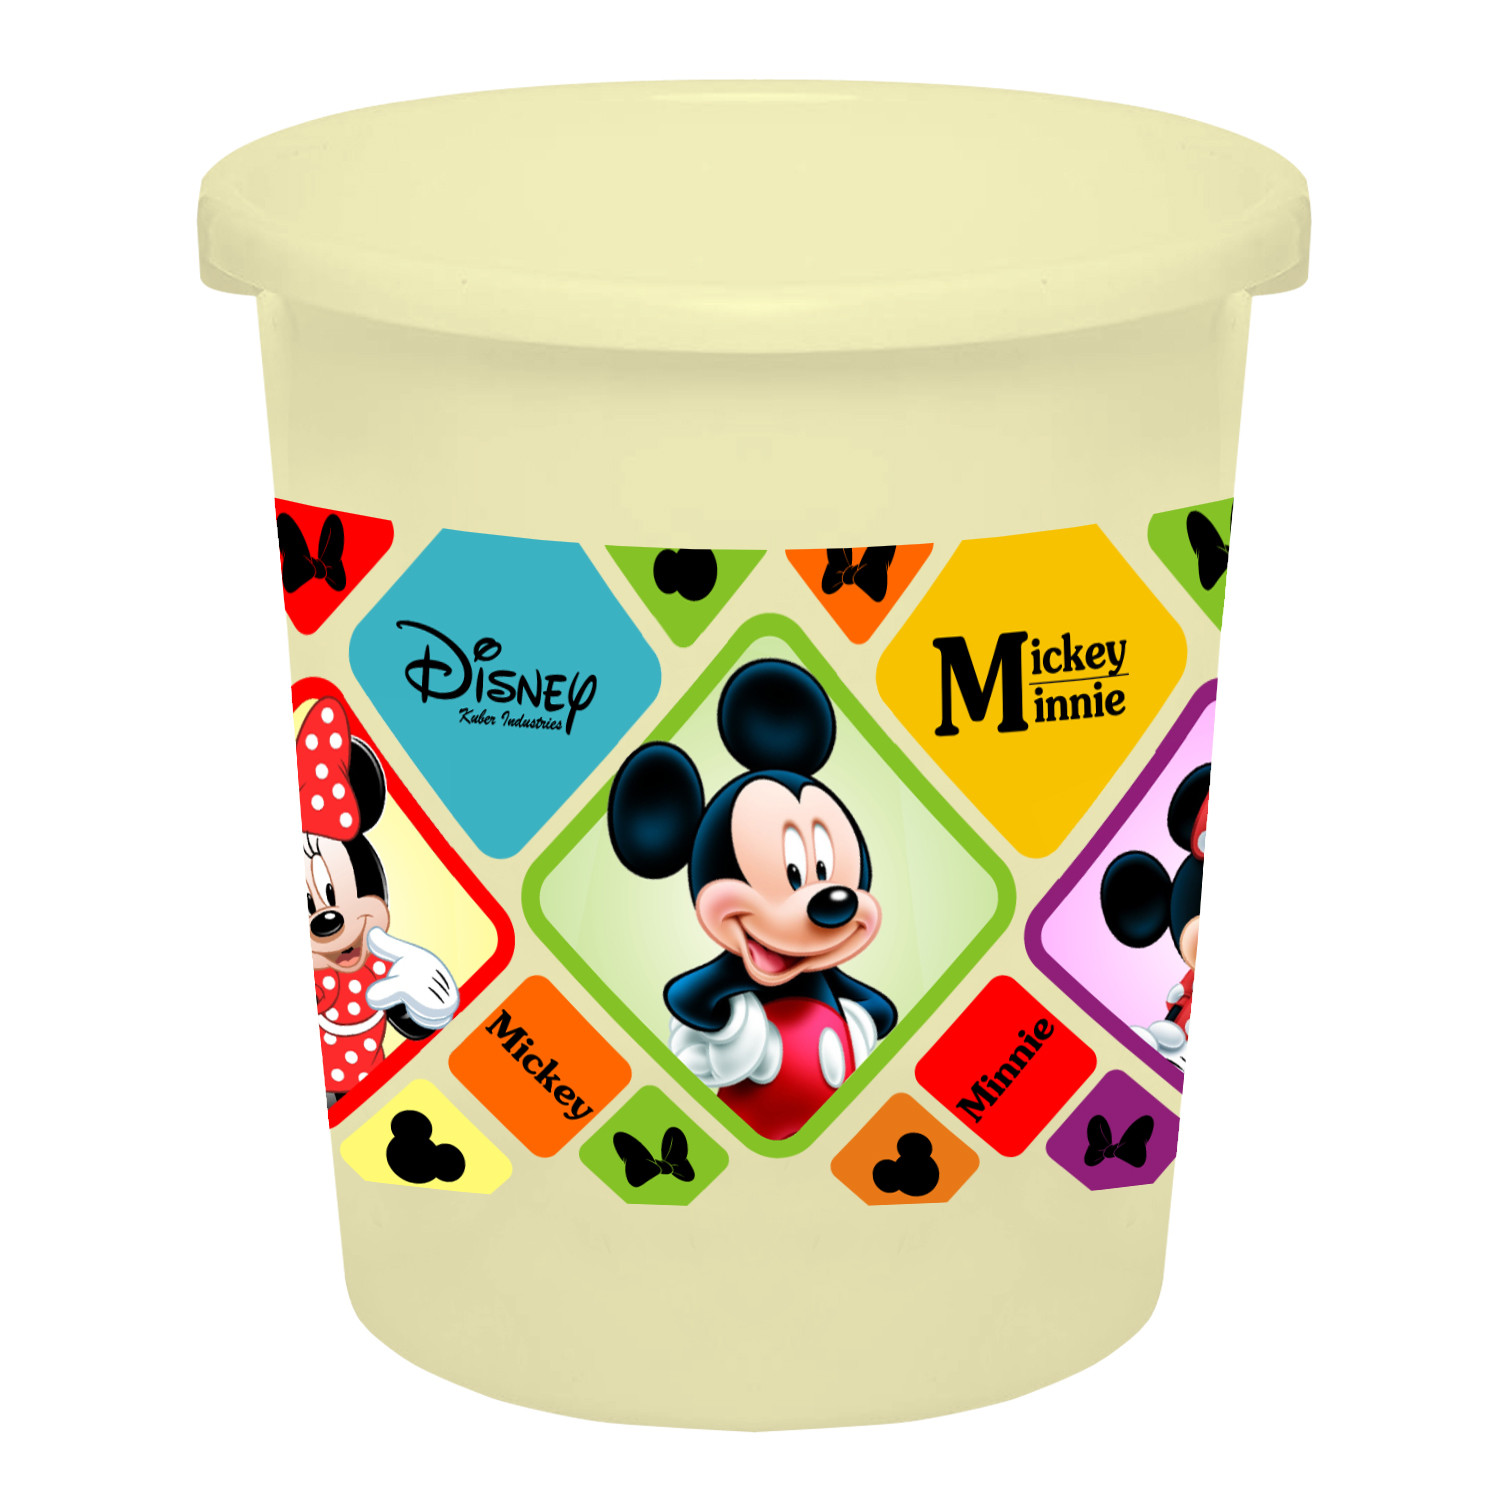 Kuber Industries Disney Mickey Minnie Print Plastic 2 Pieces Garbage Waste Dustbin/Recycling Bin for Home, Office, Factory, 5 Liters (Cream & Black) -HS_35_KUBMART17795